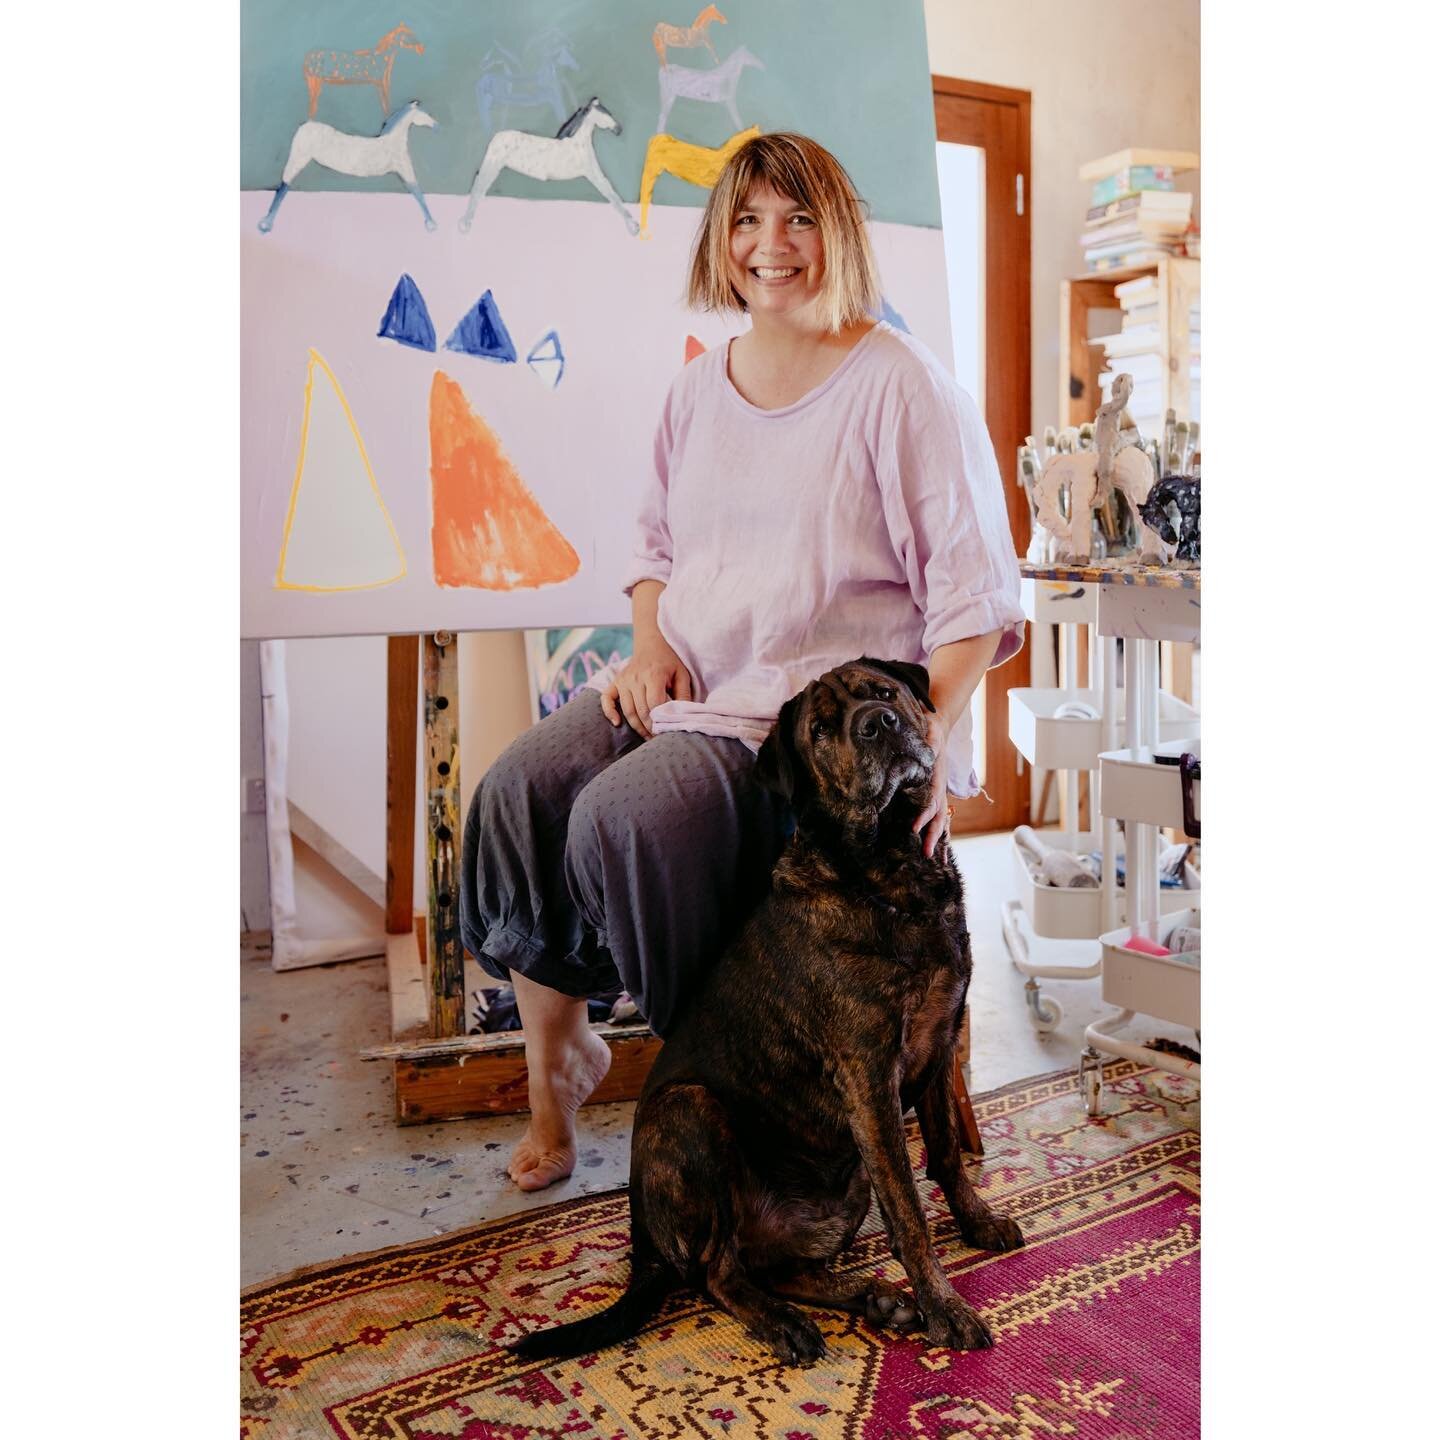 I couldn&rsquo;t have asked for a better shoot to kick off the year capturing the immensely talented and oh so lovely @katedebbo at home in her studio with her gorgeous pooch Seb.

Kate&rsquo;s having an exhibition with @lintonandkay in March and I w